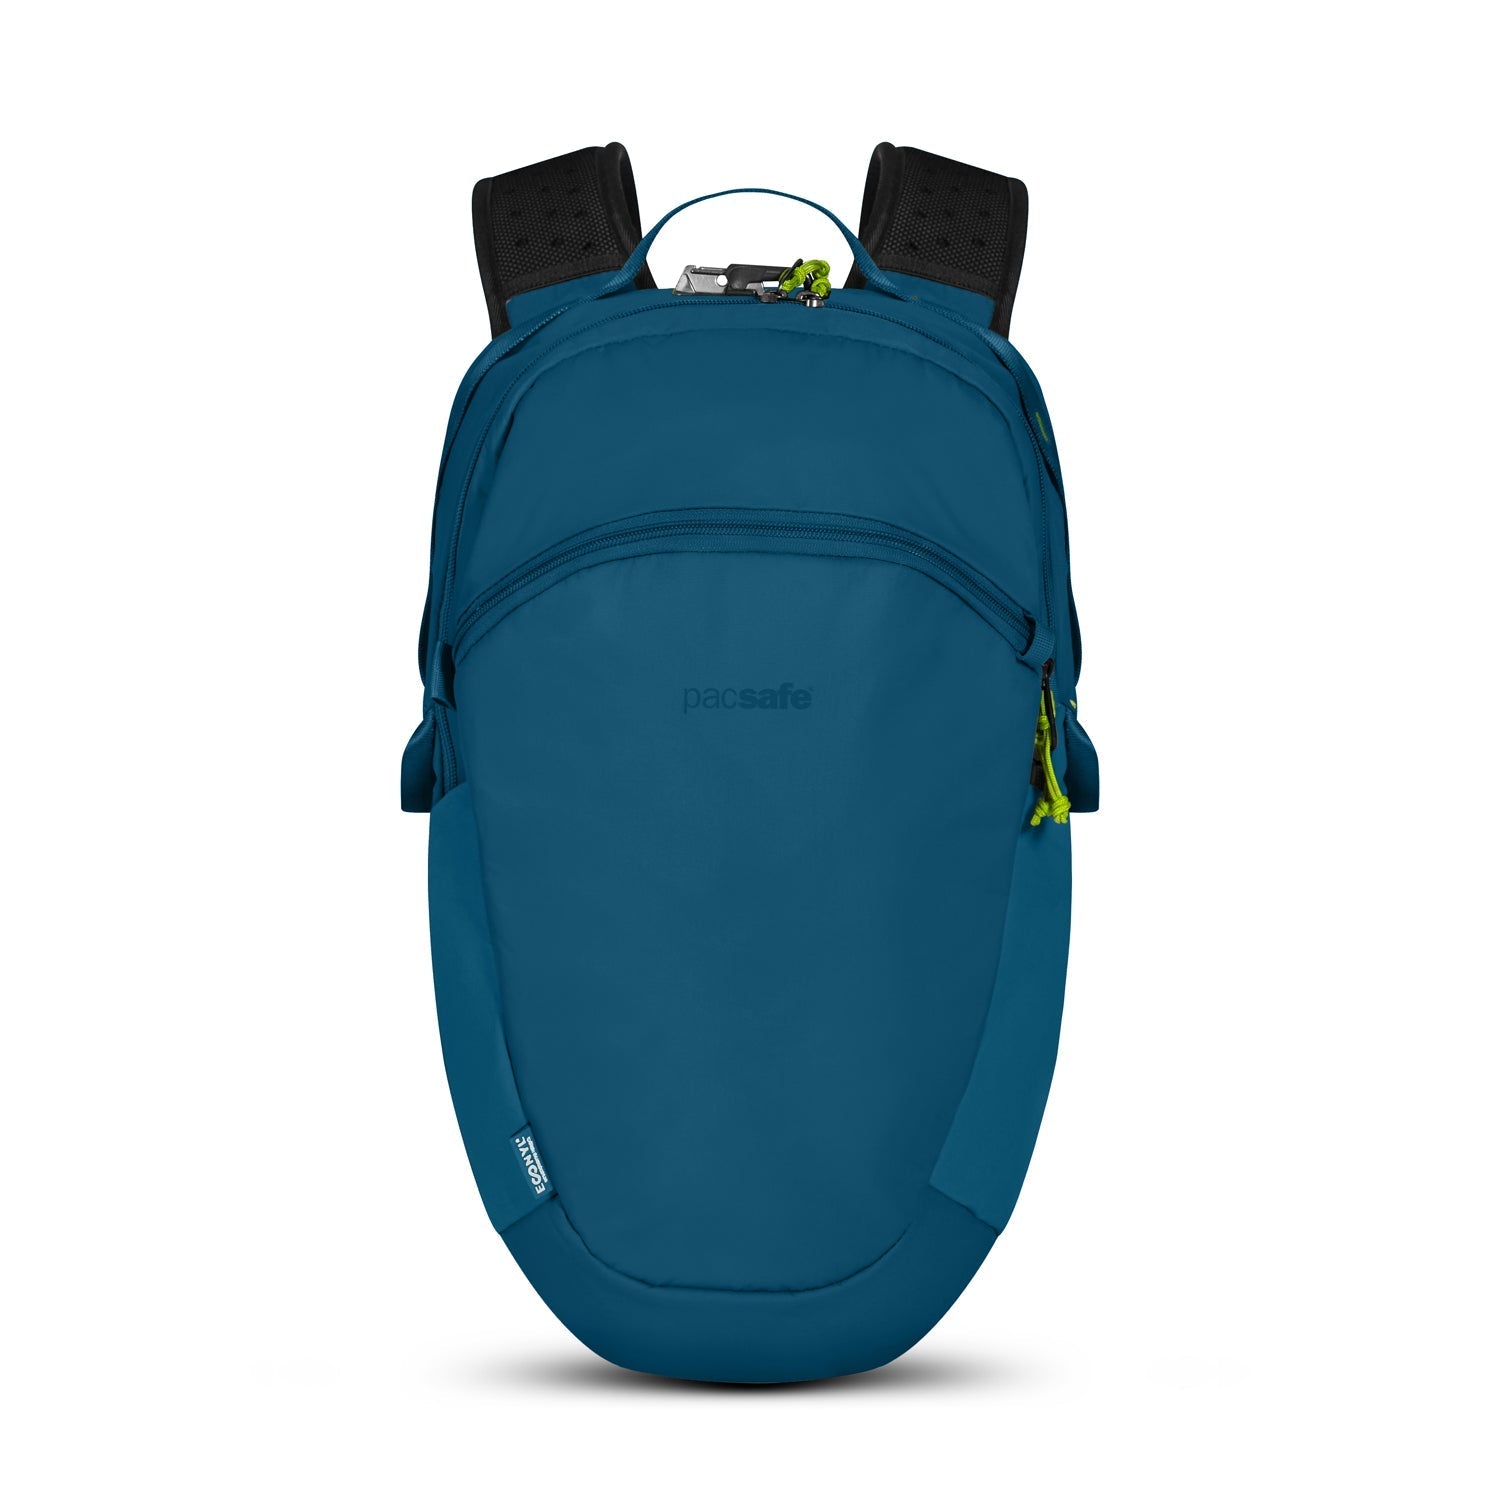 Pacsafe Official | Shop Online For Anti-Theft Backpacks & Travel Gear